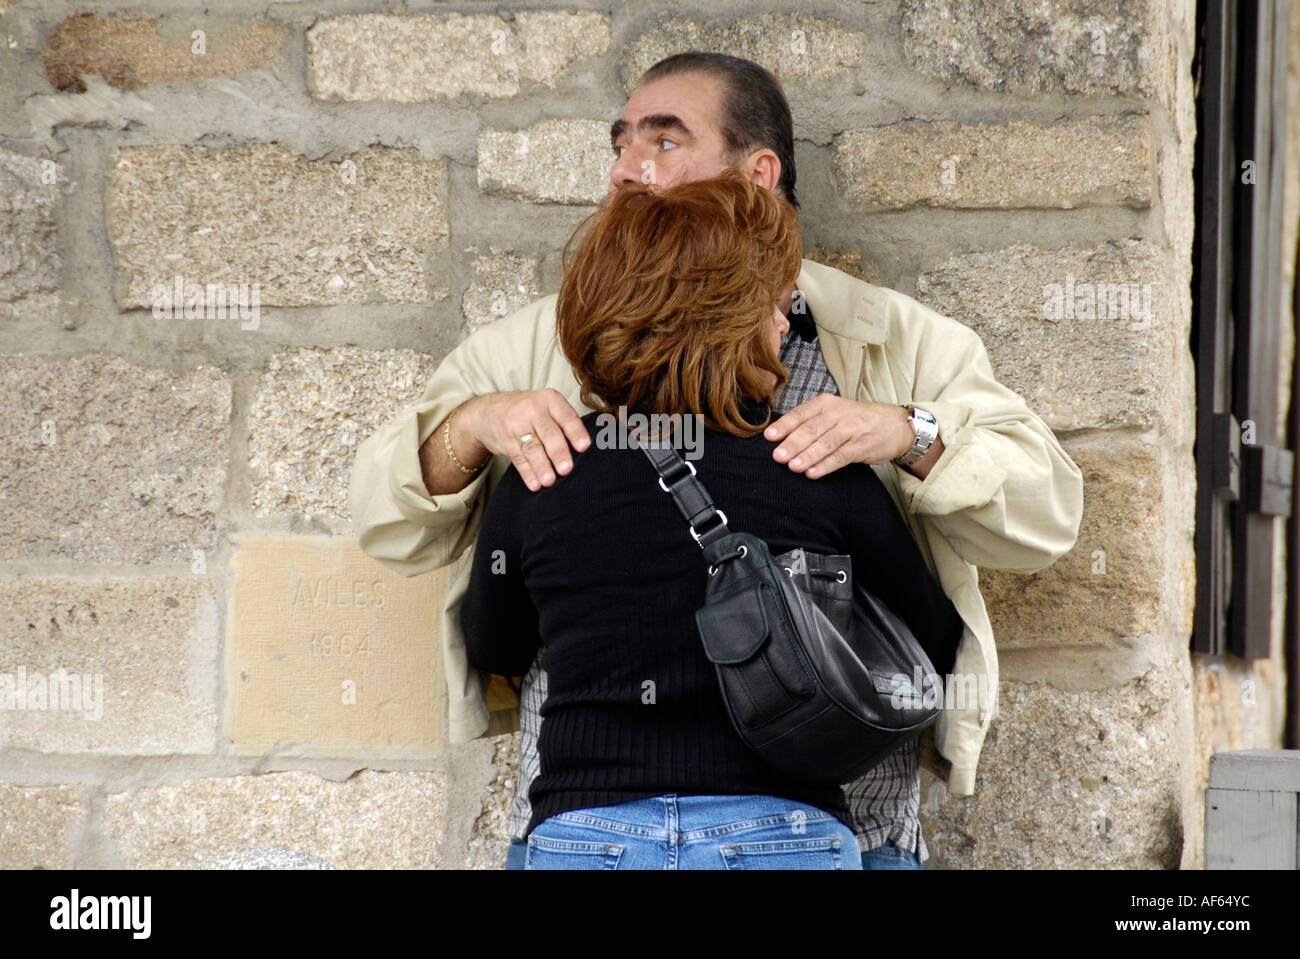 Man and woman display affection in public Stock Photo